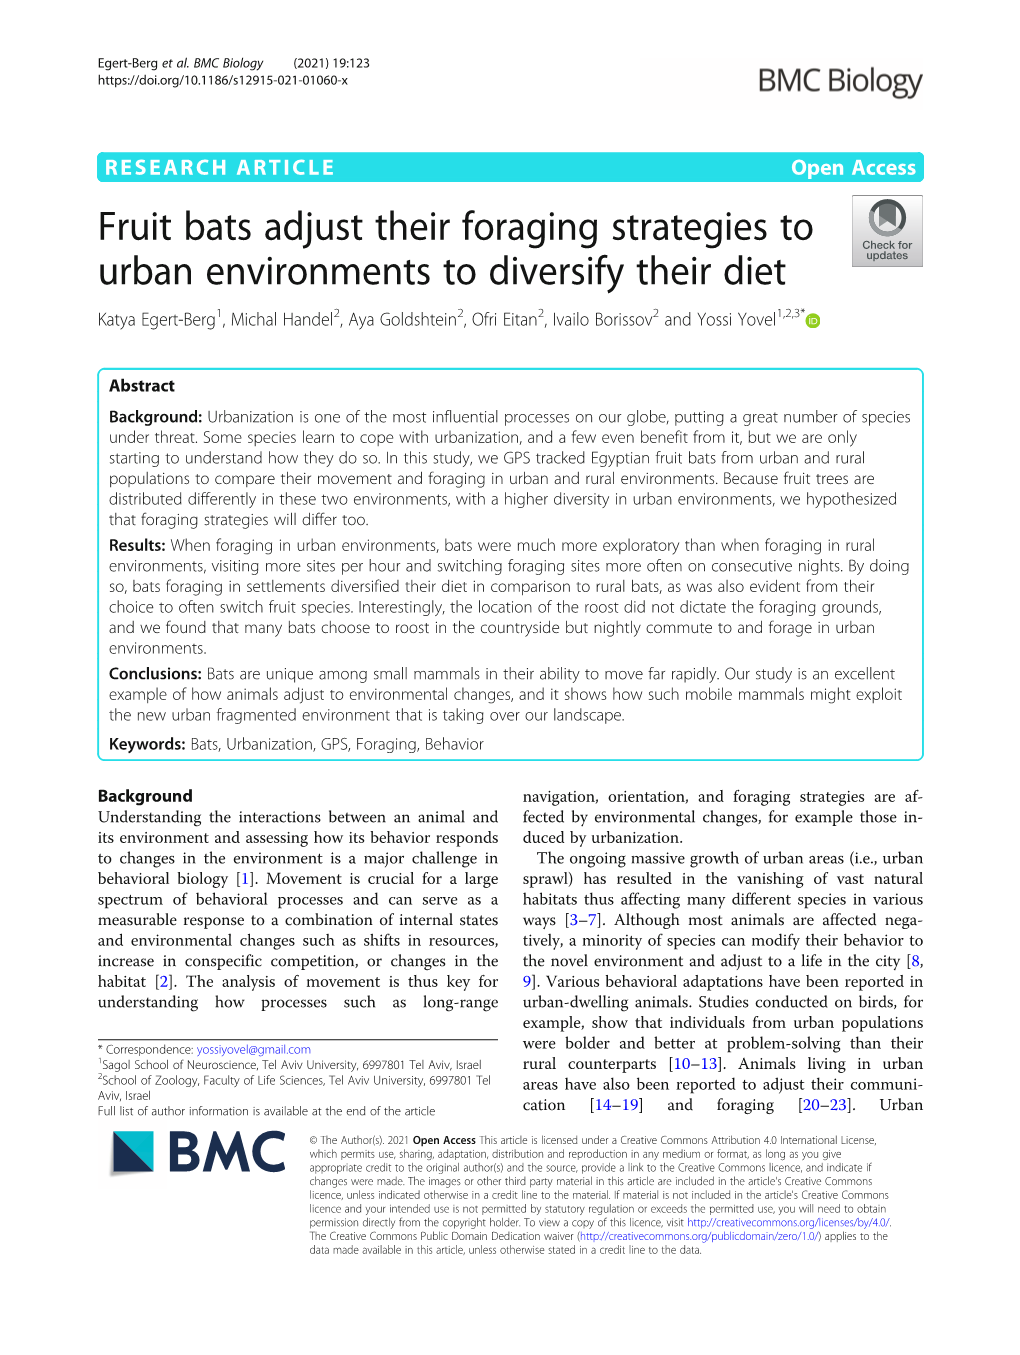 Fruit Bats Adjust Their Foraging Strategies to Urban Environments To